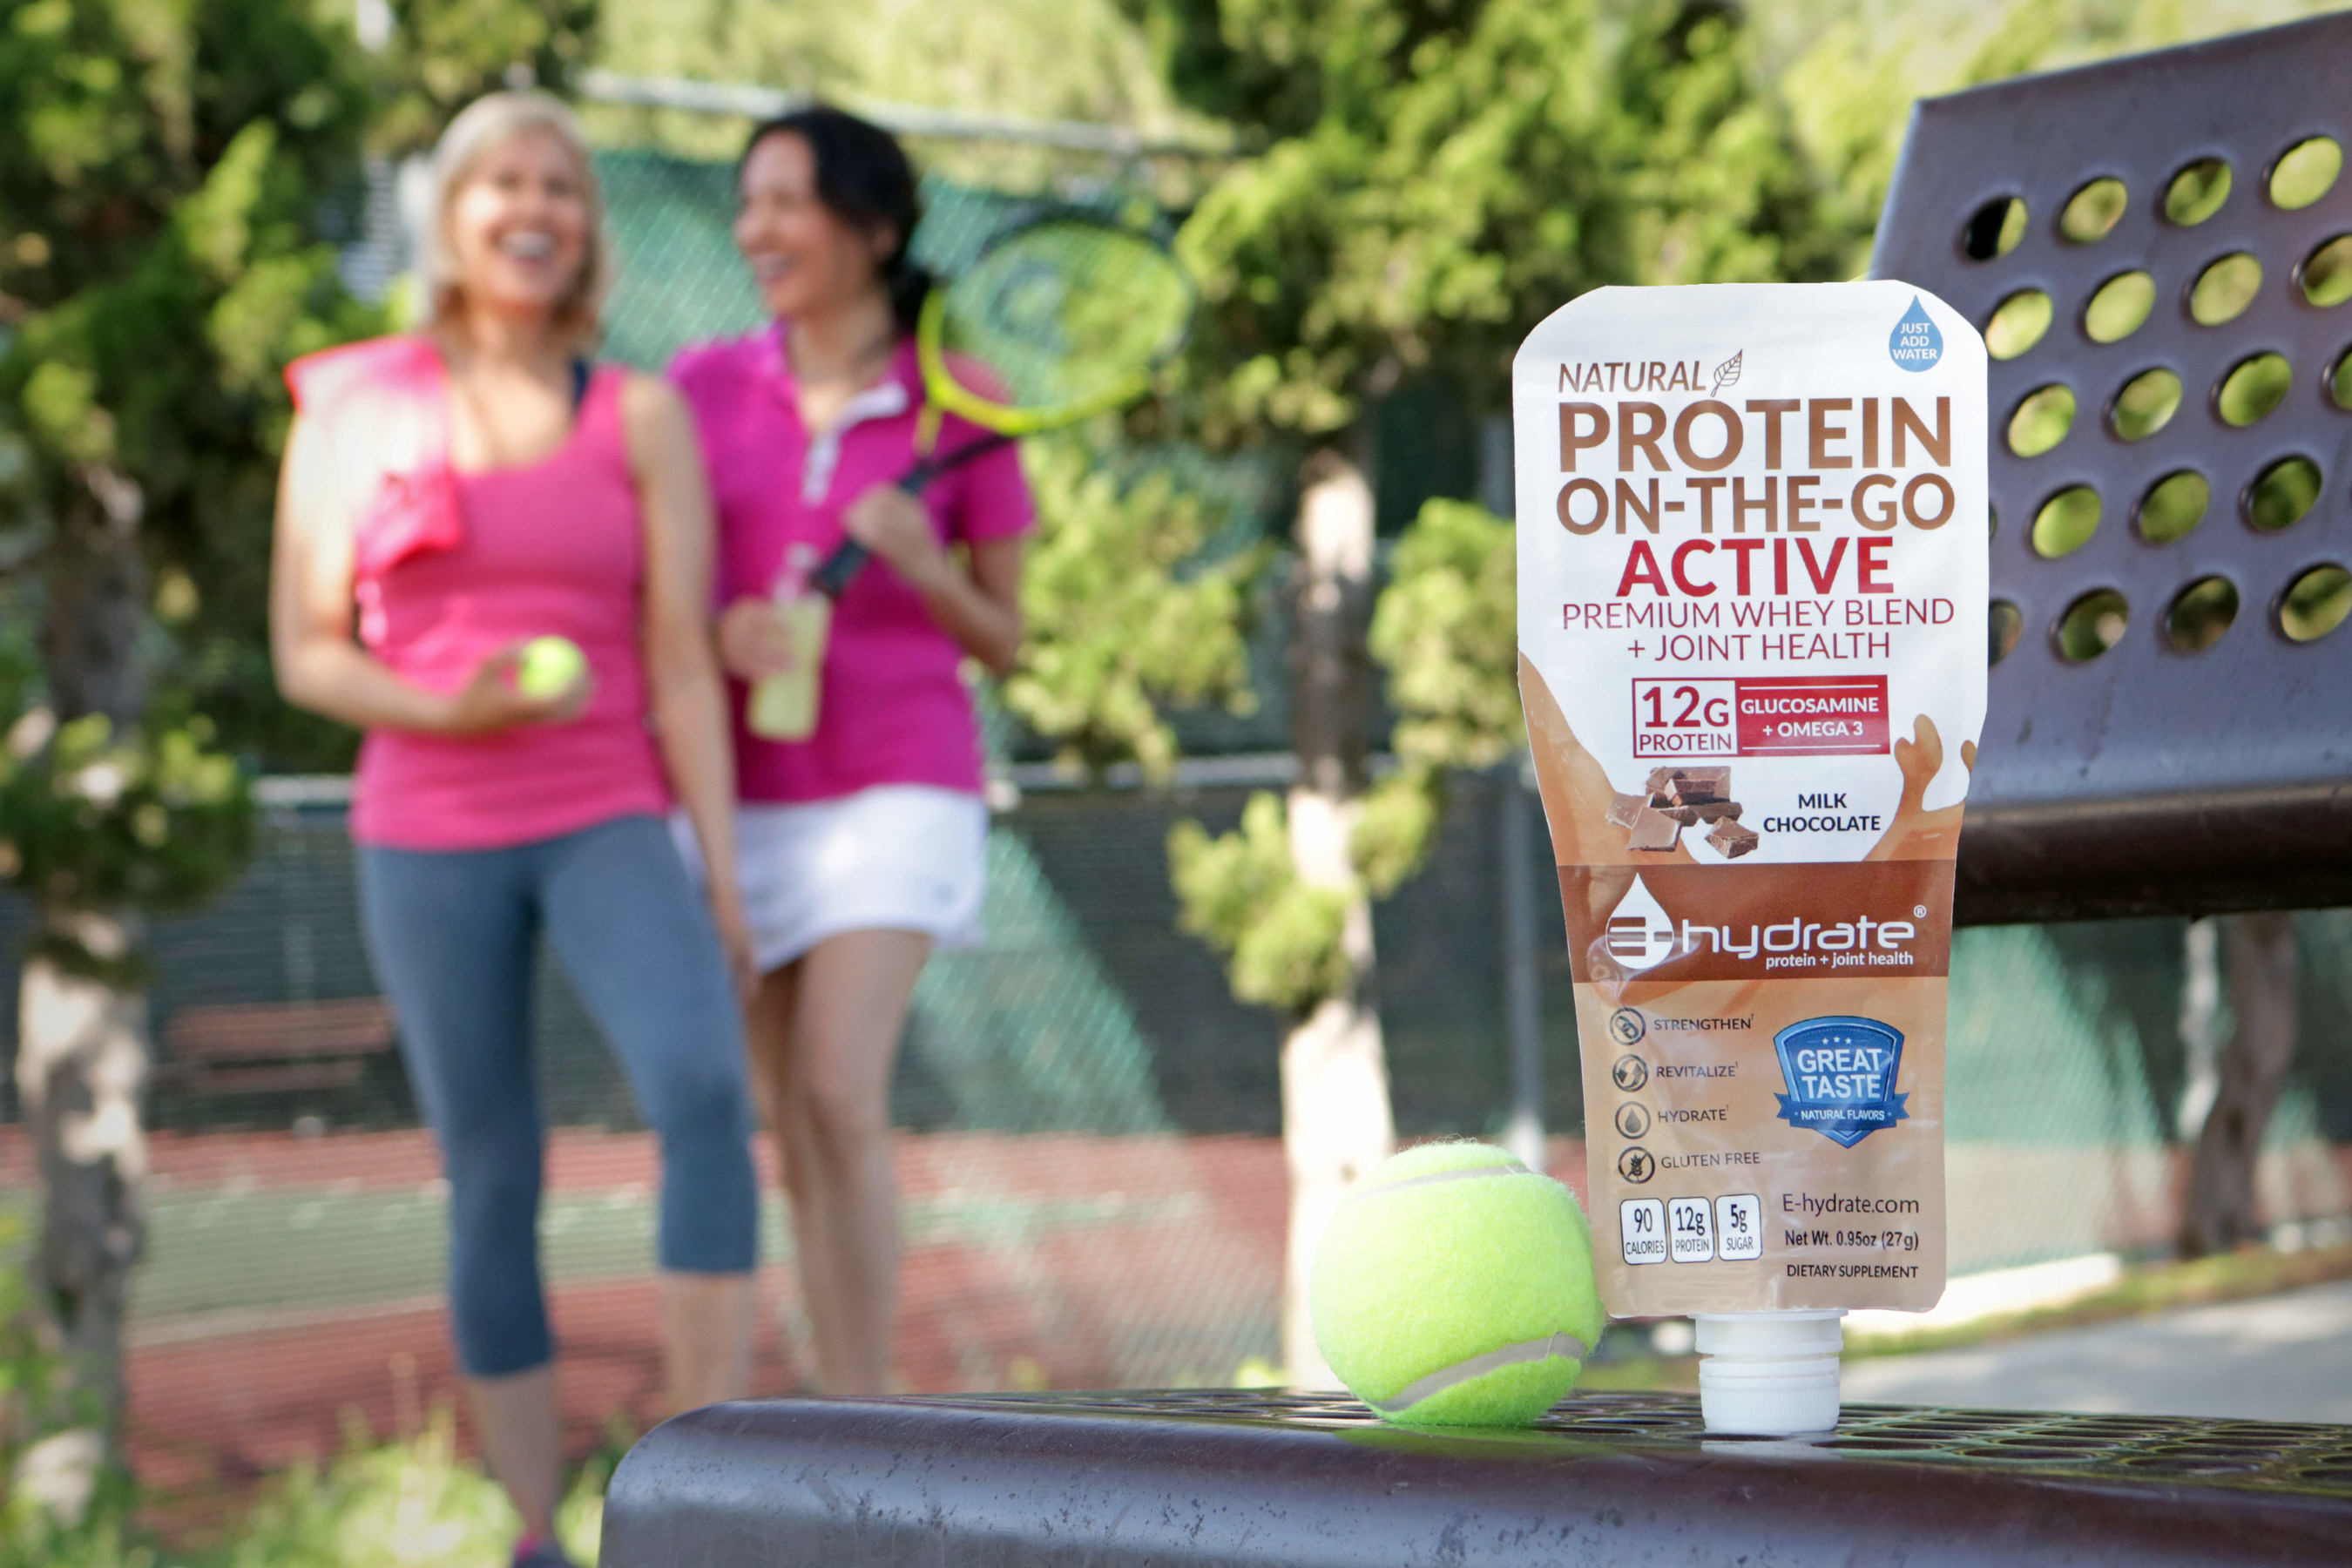 ACTIVE is premium protein that's low in sugar with the added power of glucosamine and omega-3s.